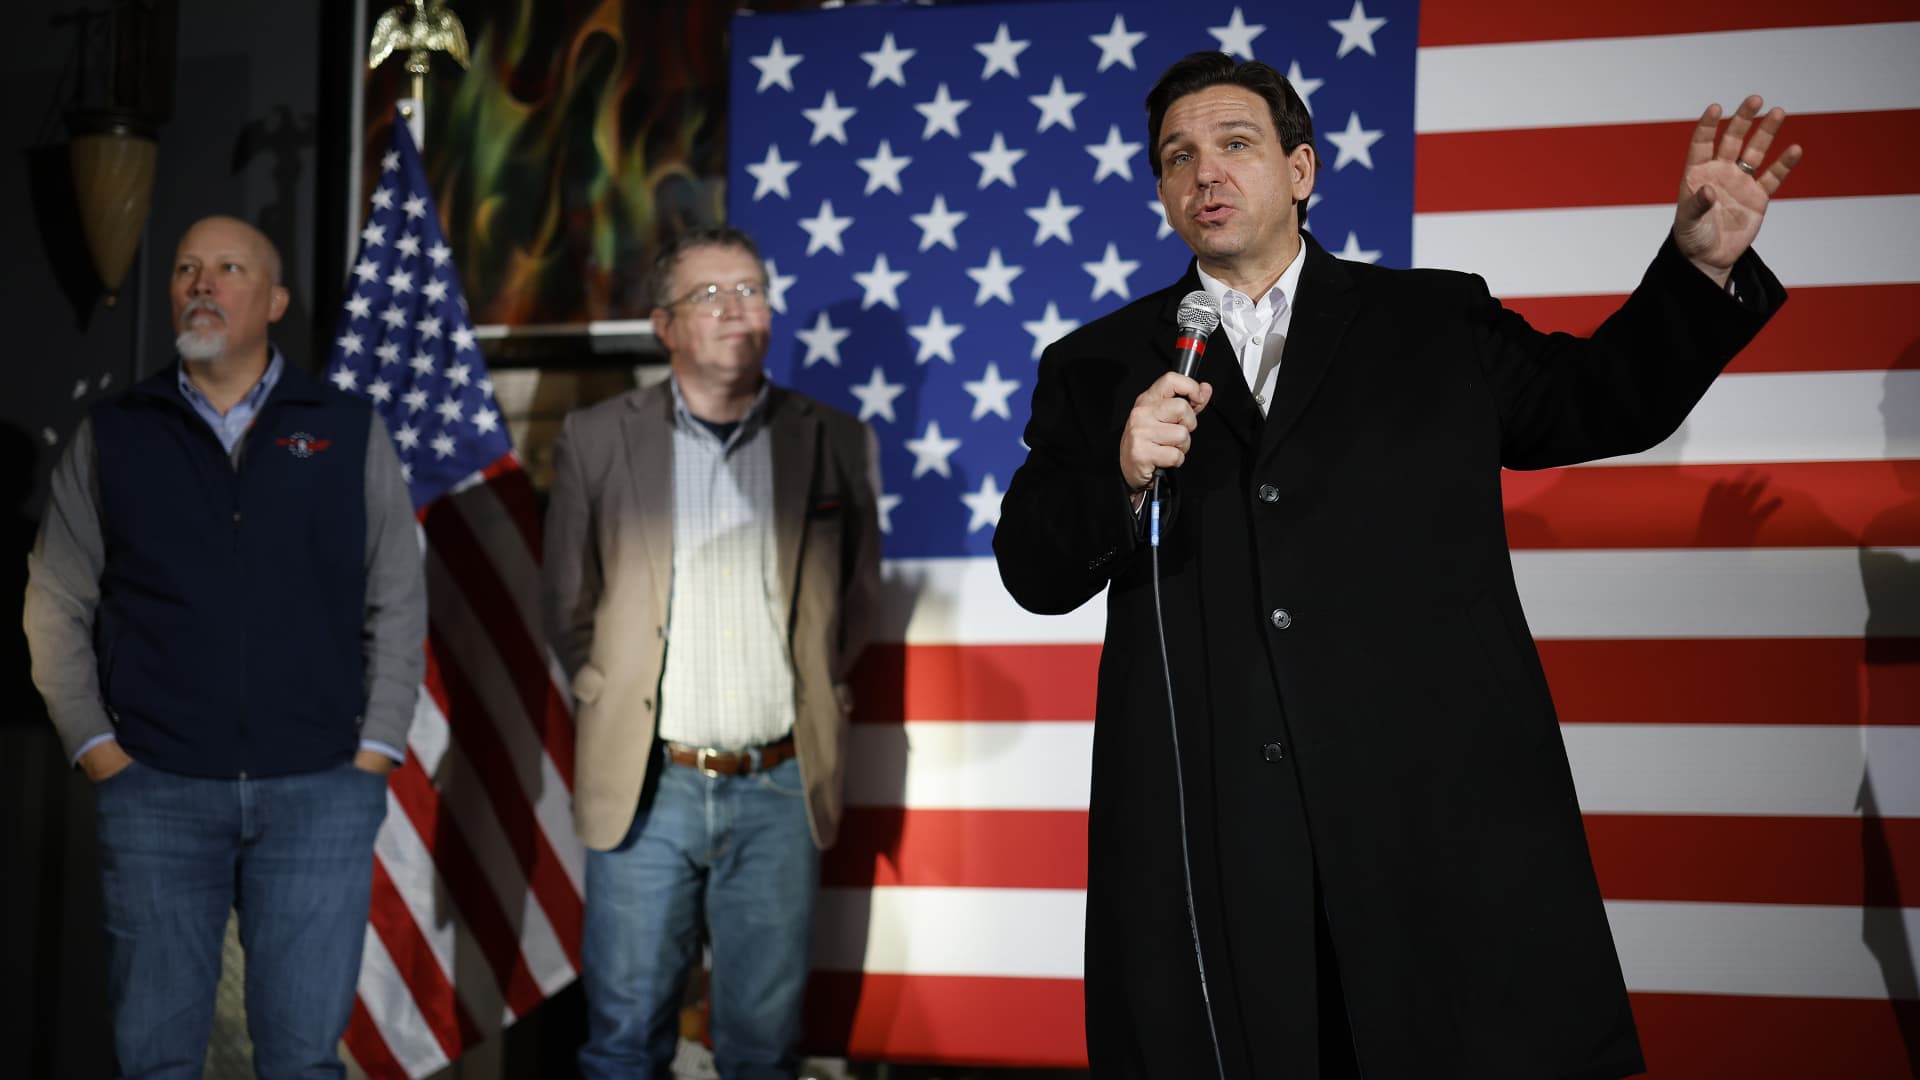 Republican presidential candidate Florida Gov. Ron DeSantis (R) is joined on stage by Rep. Chip Roy (R-TX) (L) and Rep. Thomas Massie (R-KY) (2nd-L) during a campaign event at the Chrome Horse Saloon one day before the Iowa caucuses on January 14, 2024 in Cedar Rapids, Iowa.